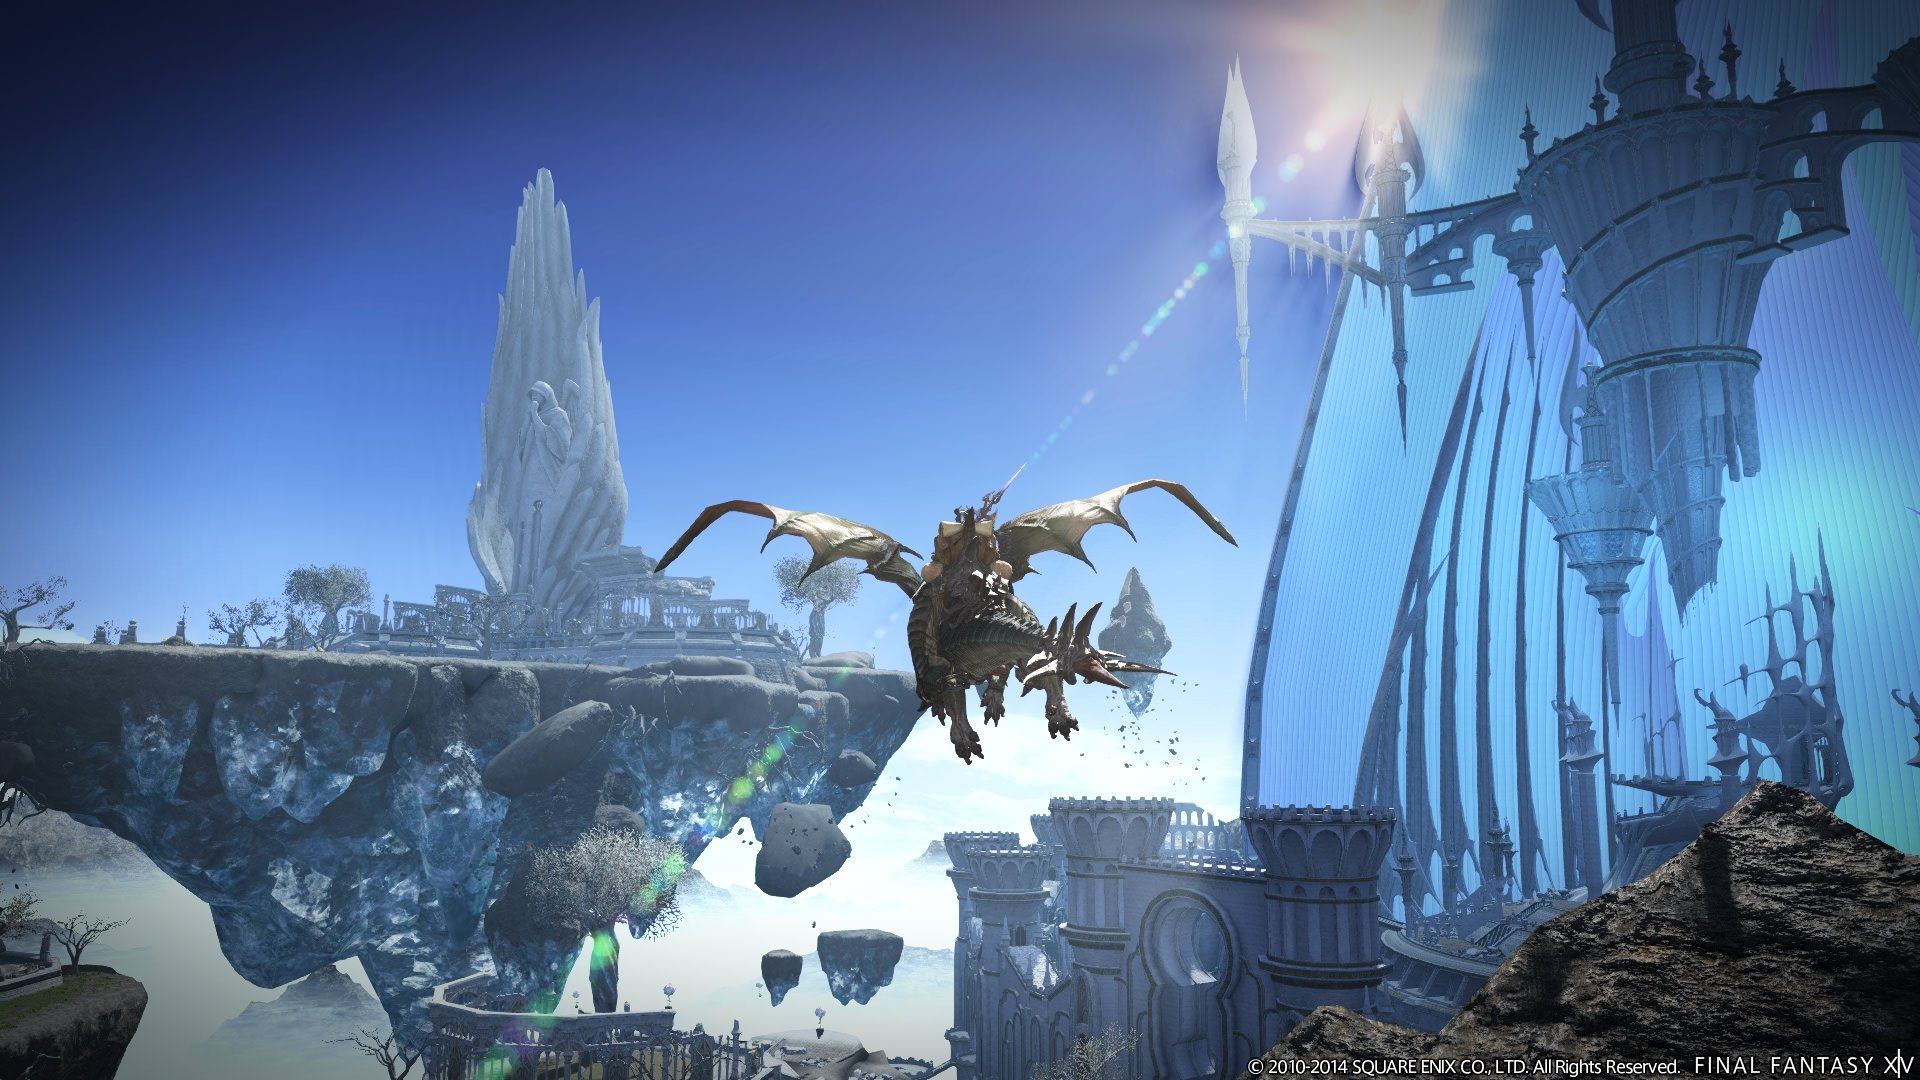 Heavensward - What can we expect from Final Fantasy XIV's first